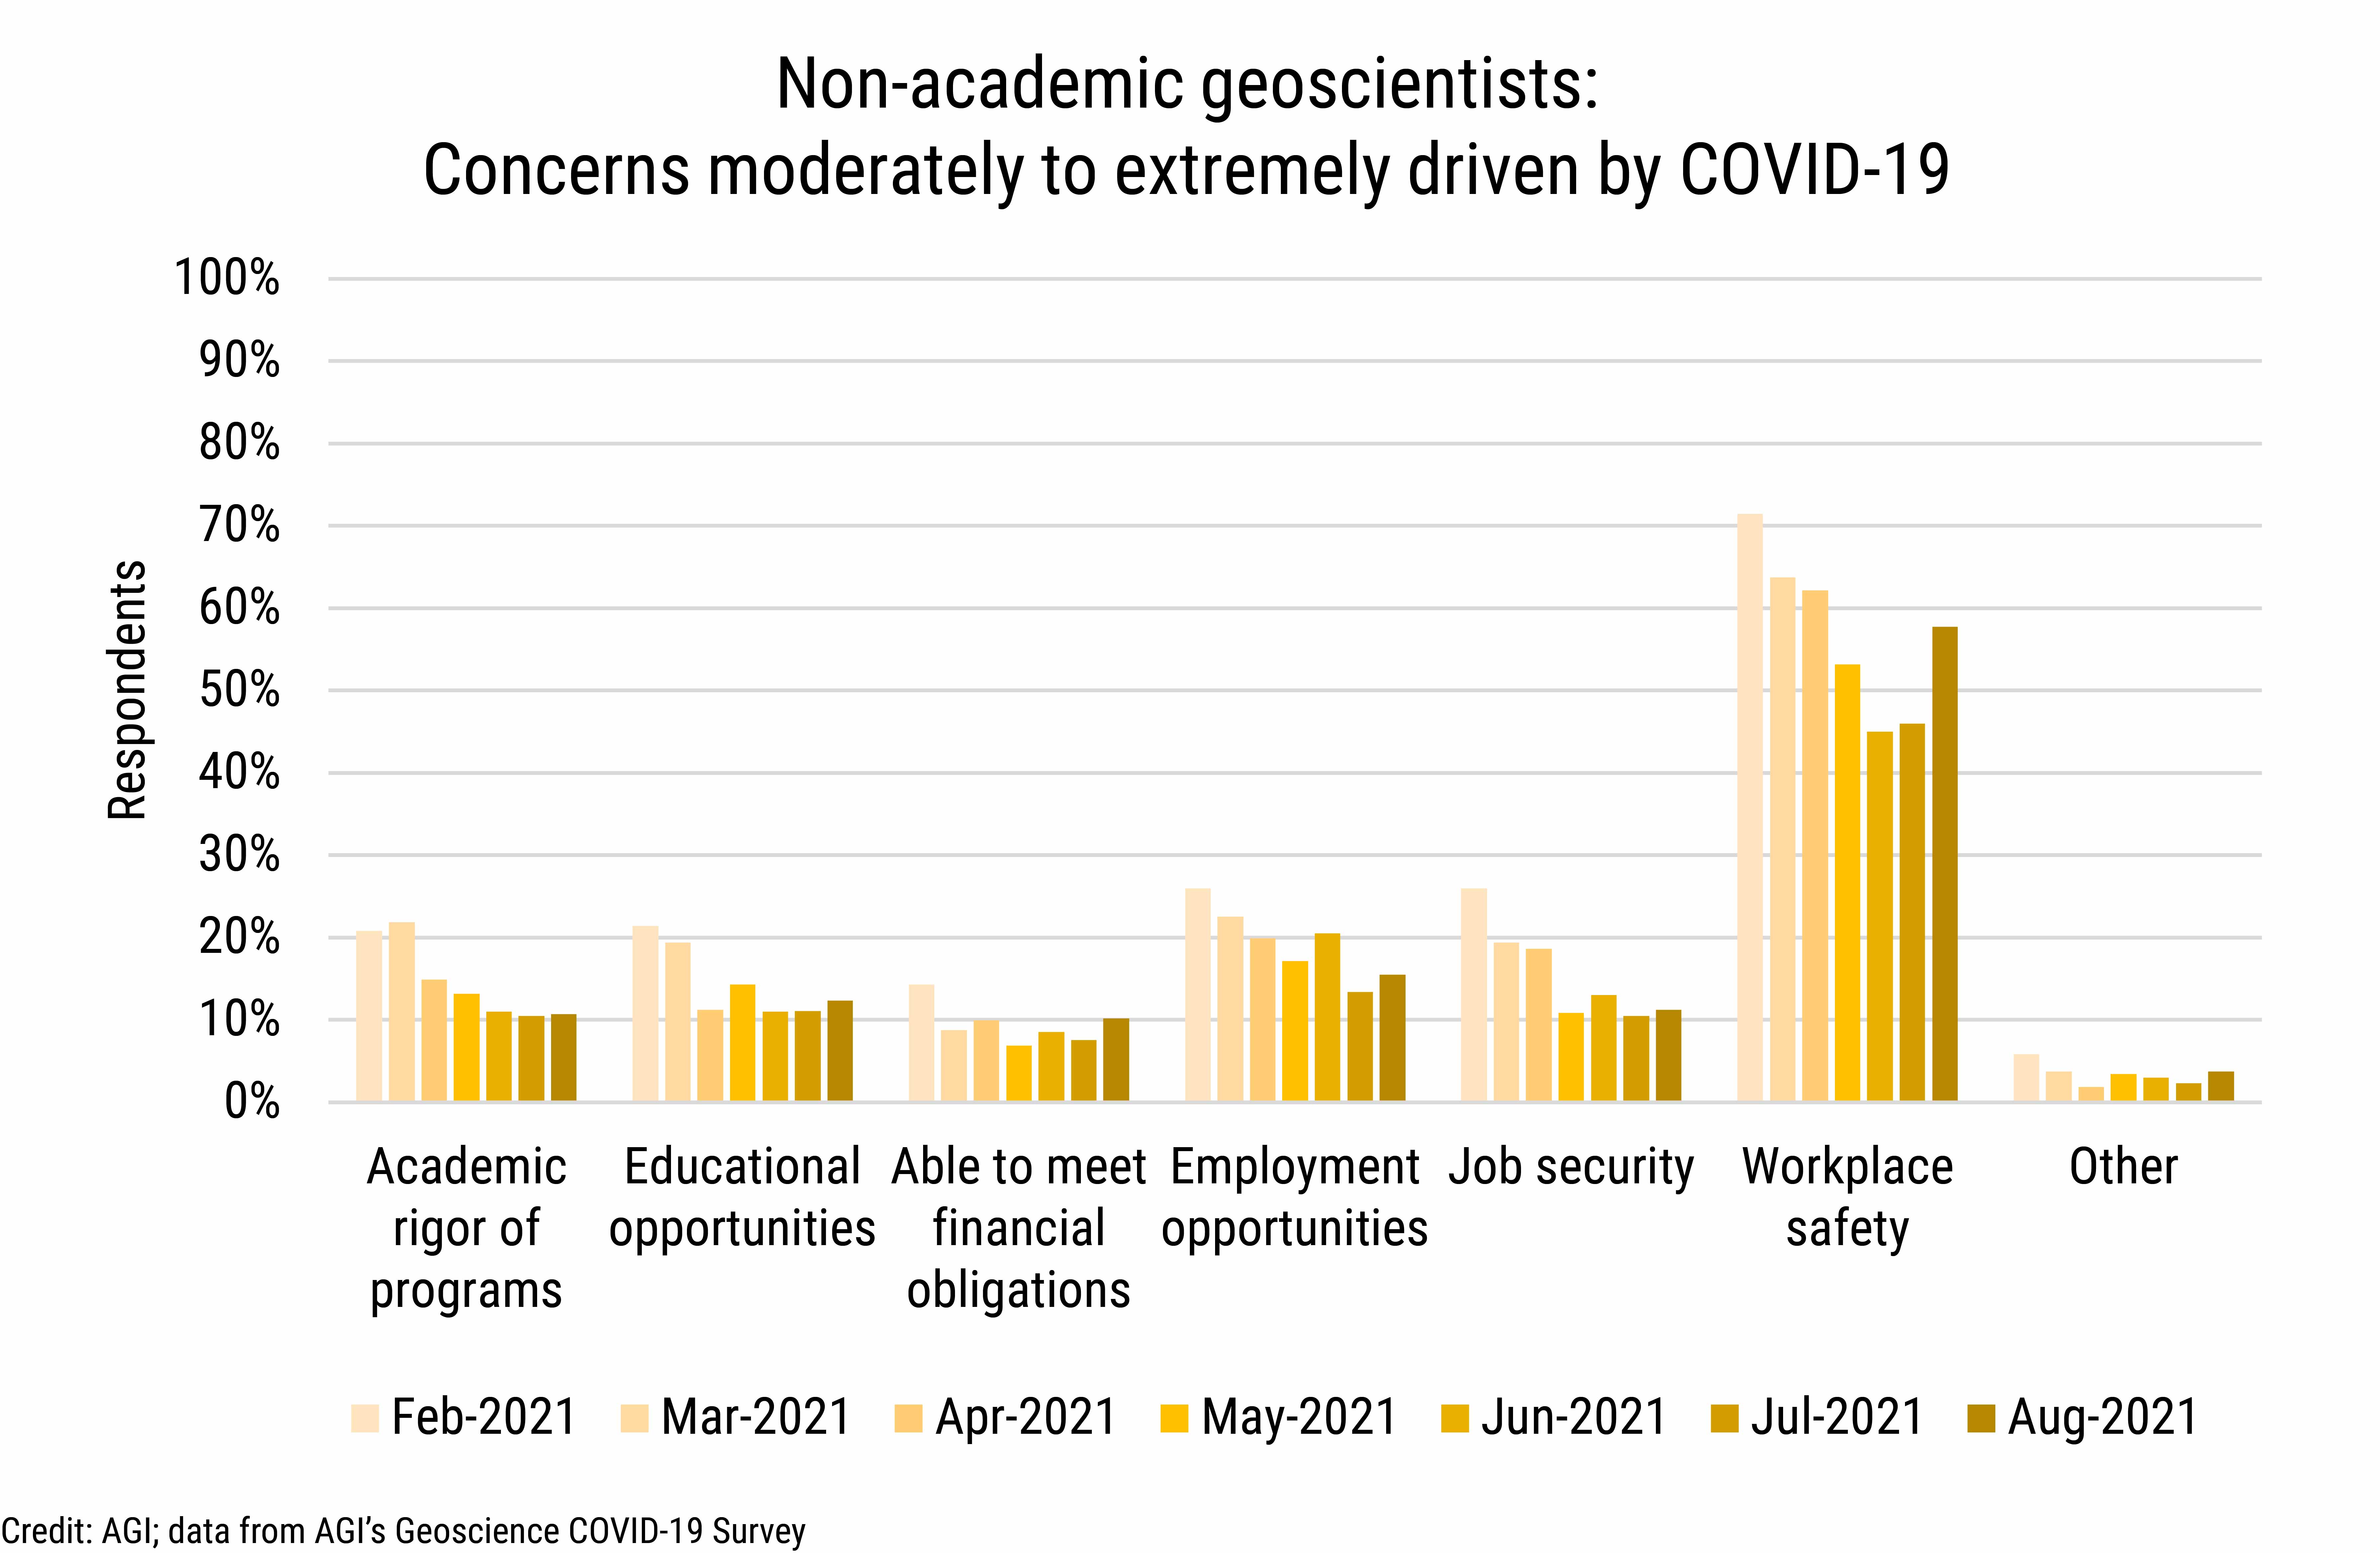 DB_2021-031 chart 09: Non-academic geoscientists: Concerns moderately to extremely driven by COVID-19 (Credit: AGI; data from AGI's Geoscience COVID-19 Survey)